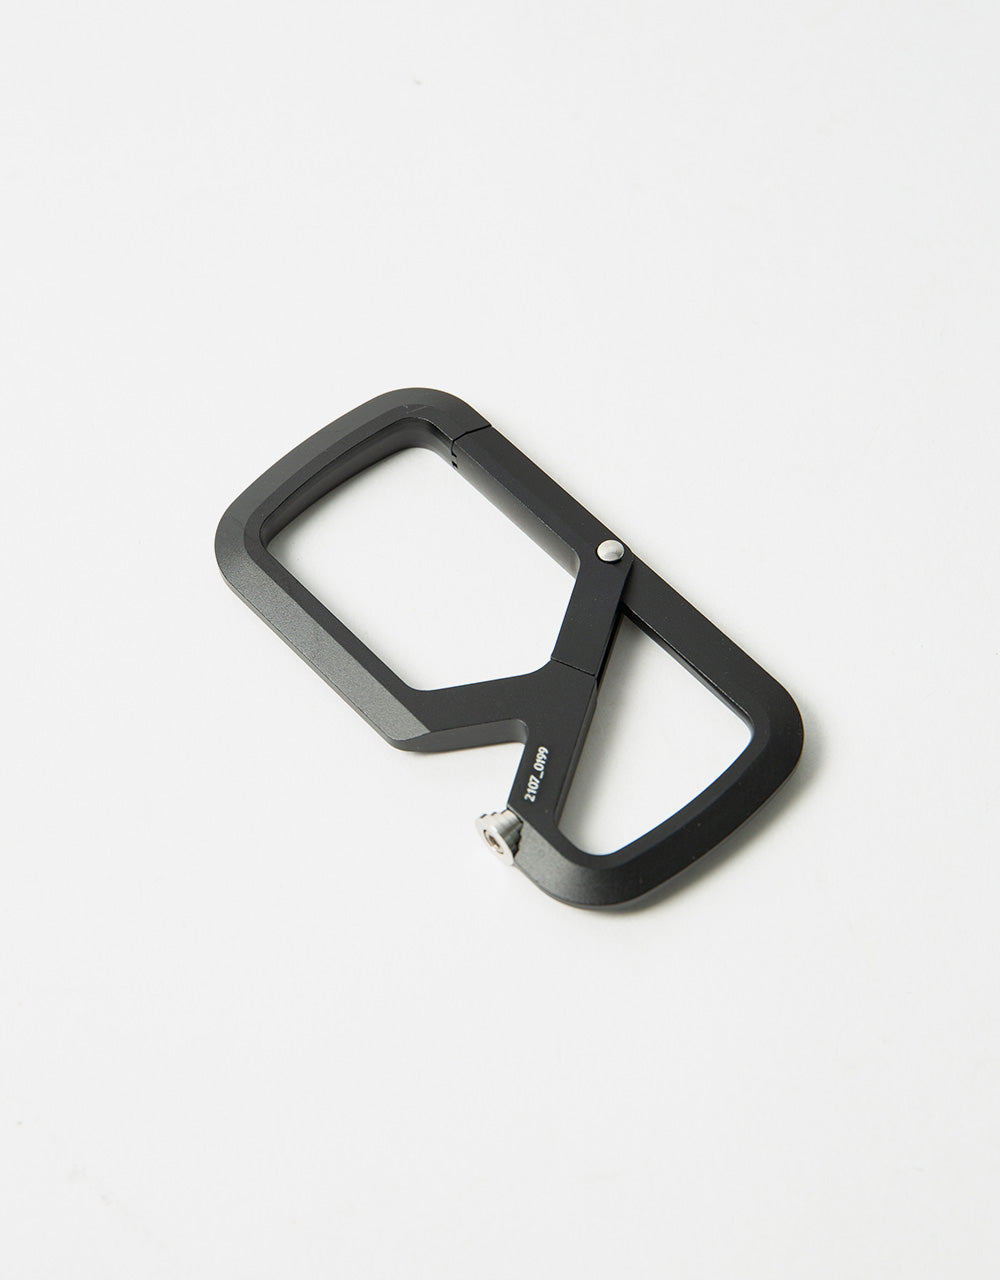 James The Mehlville 'Carabiner' Keychain - Black/Stainless